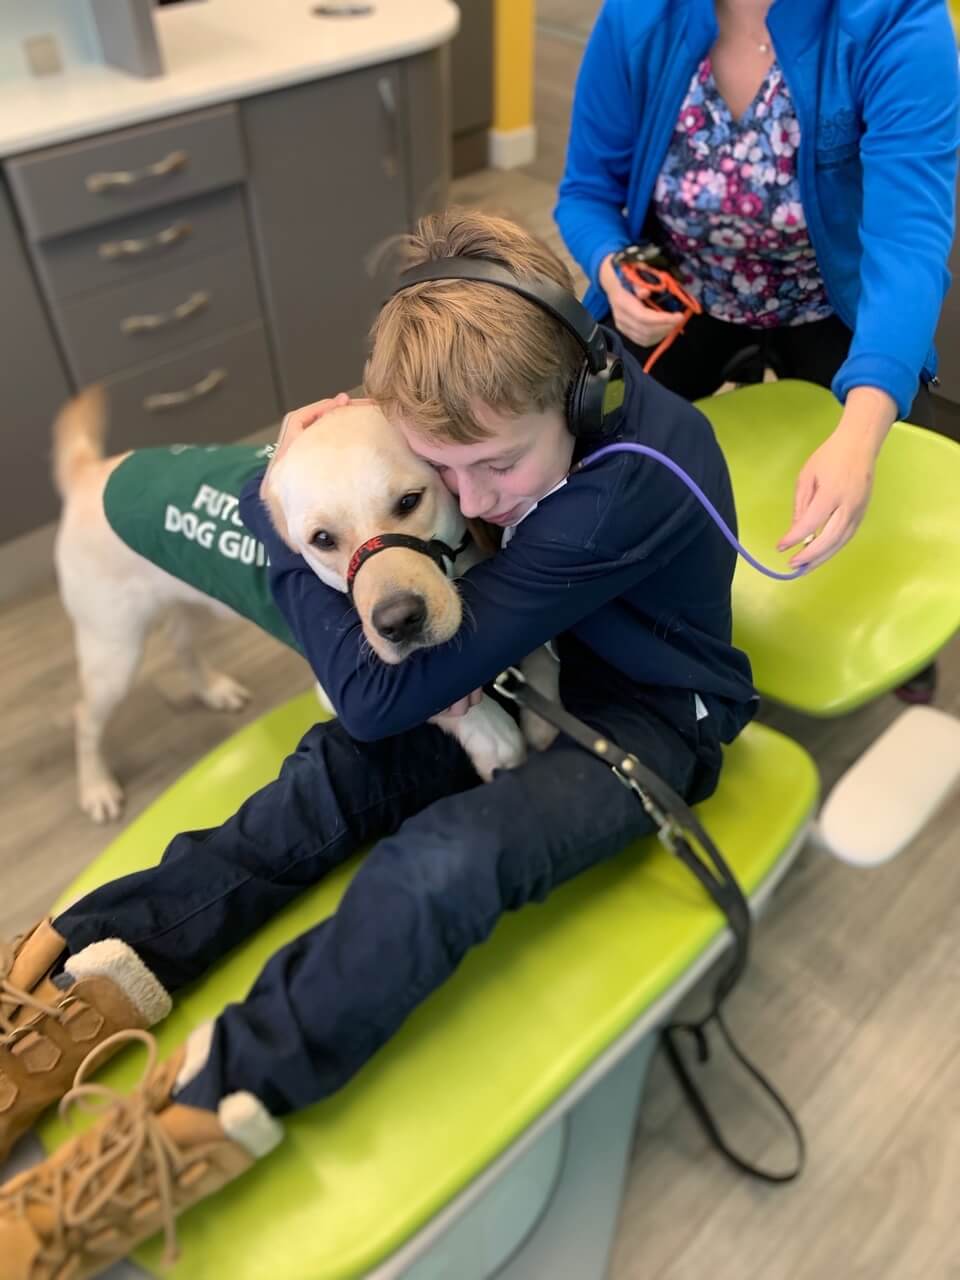 Child sitting in patient's chair, hugging a guide dog